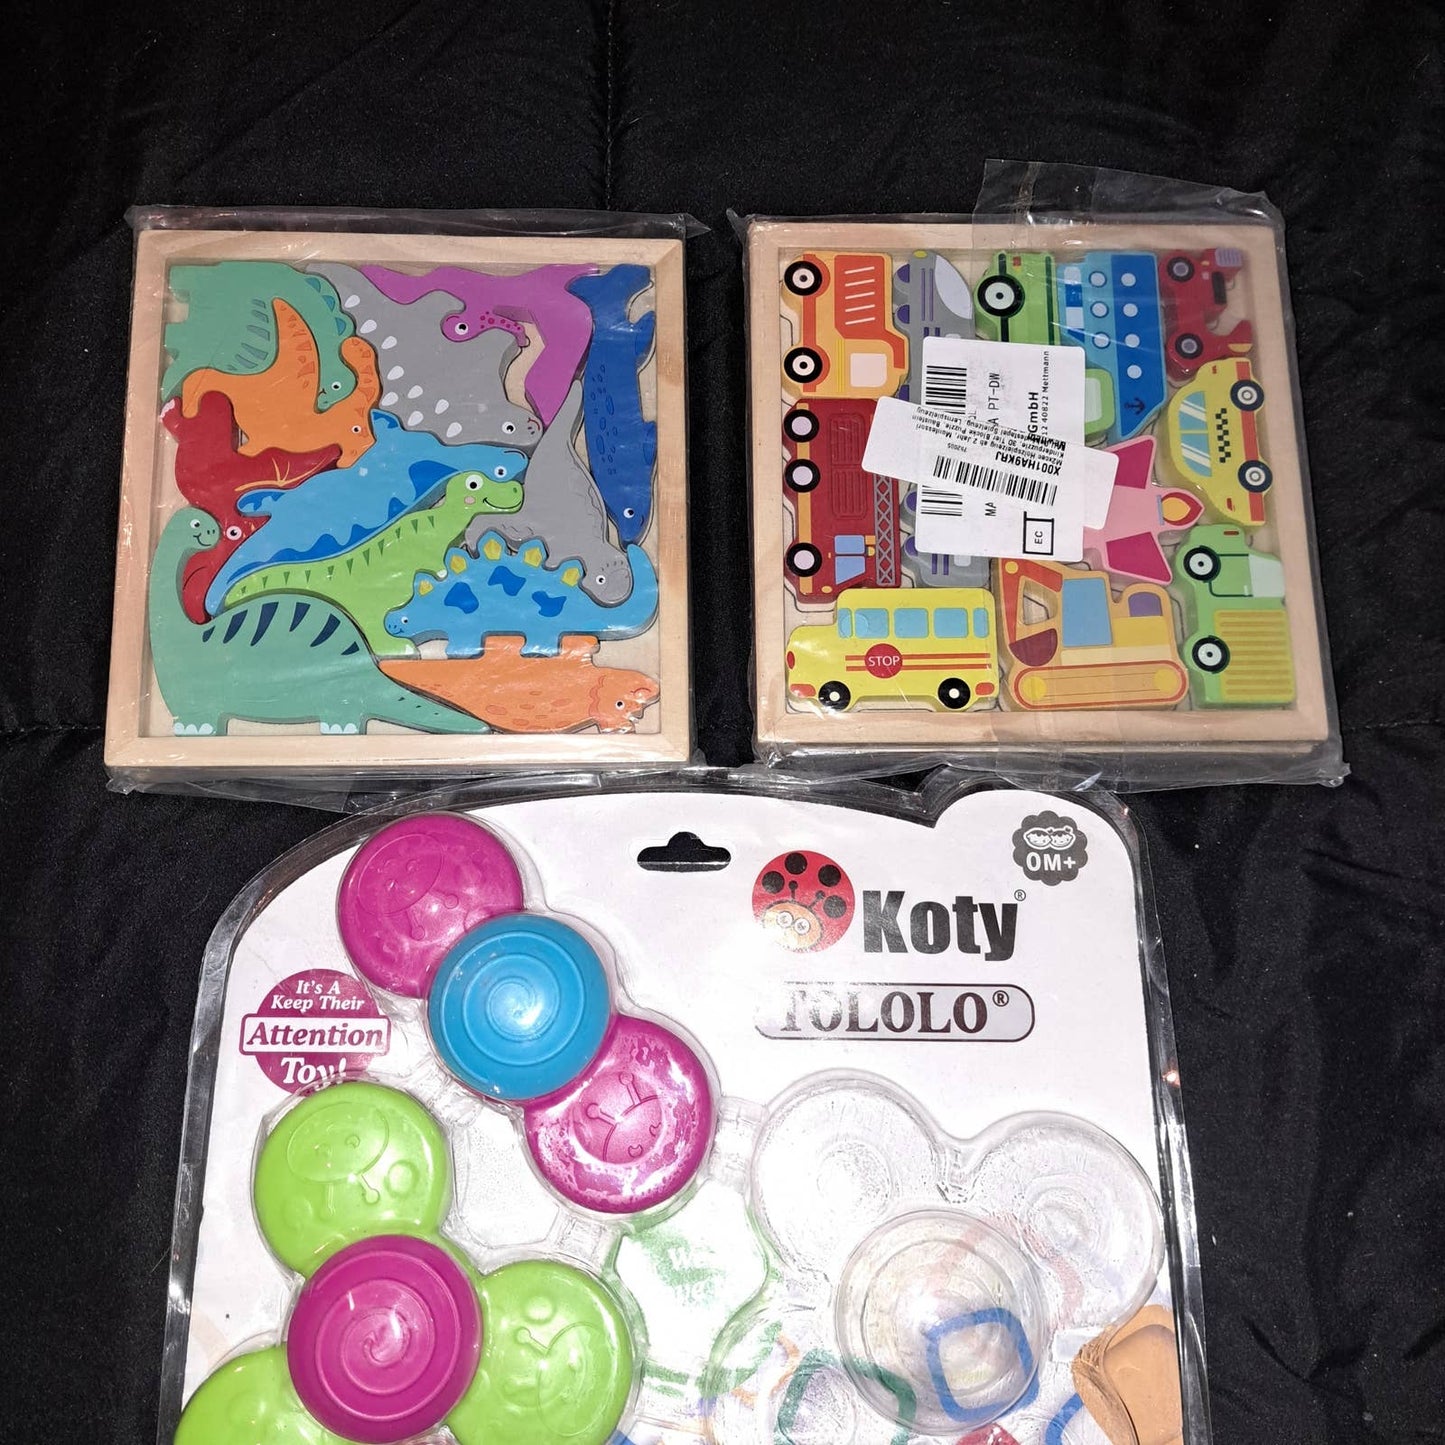 NIB - 2 Montessori Woodend Puzzles with 2 new Suction Spinning